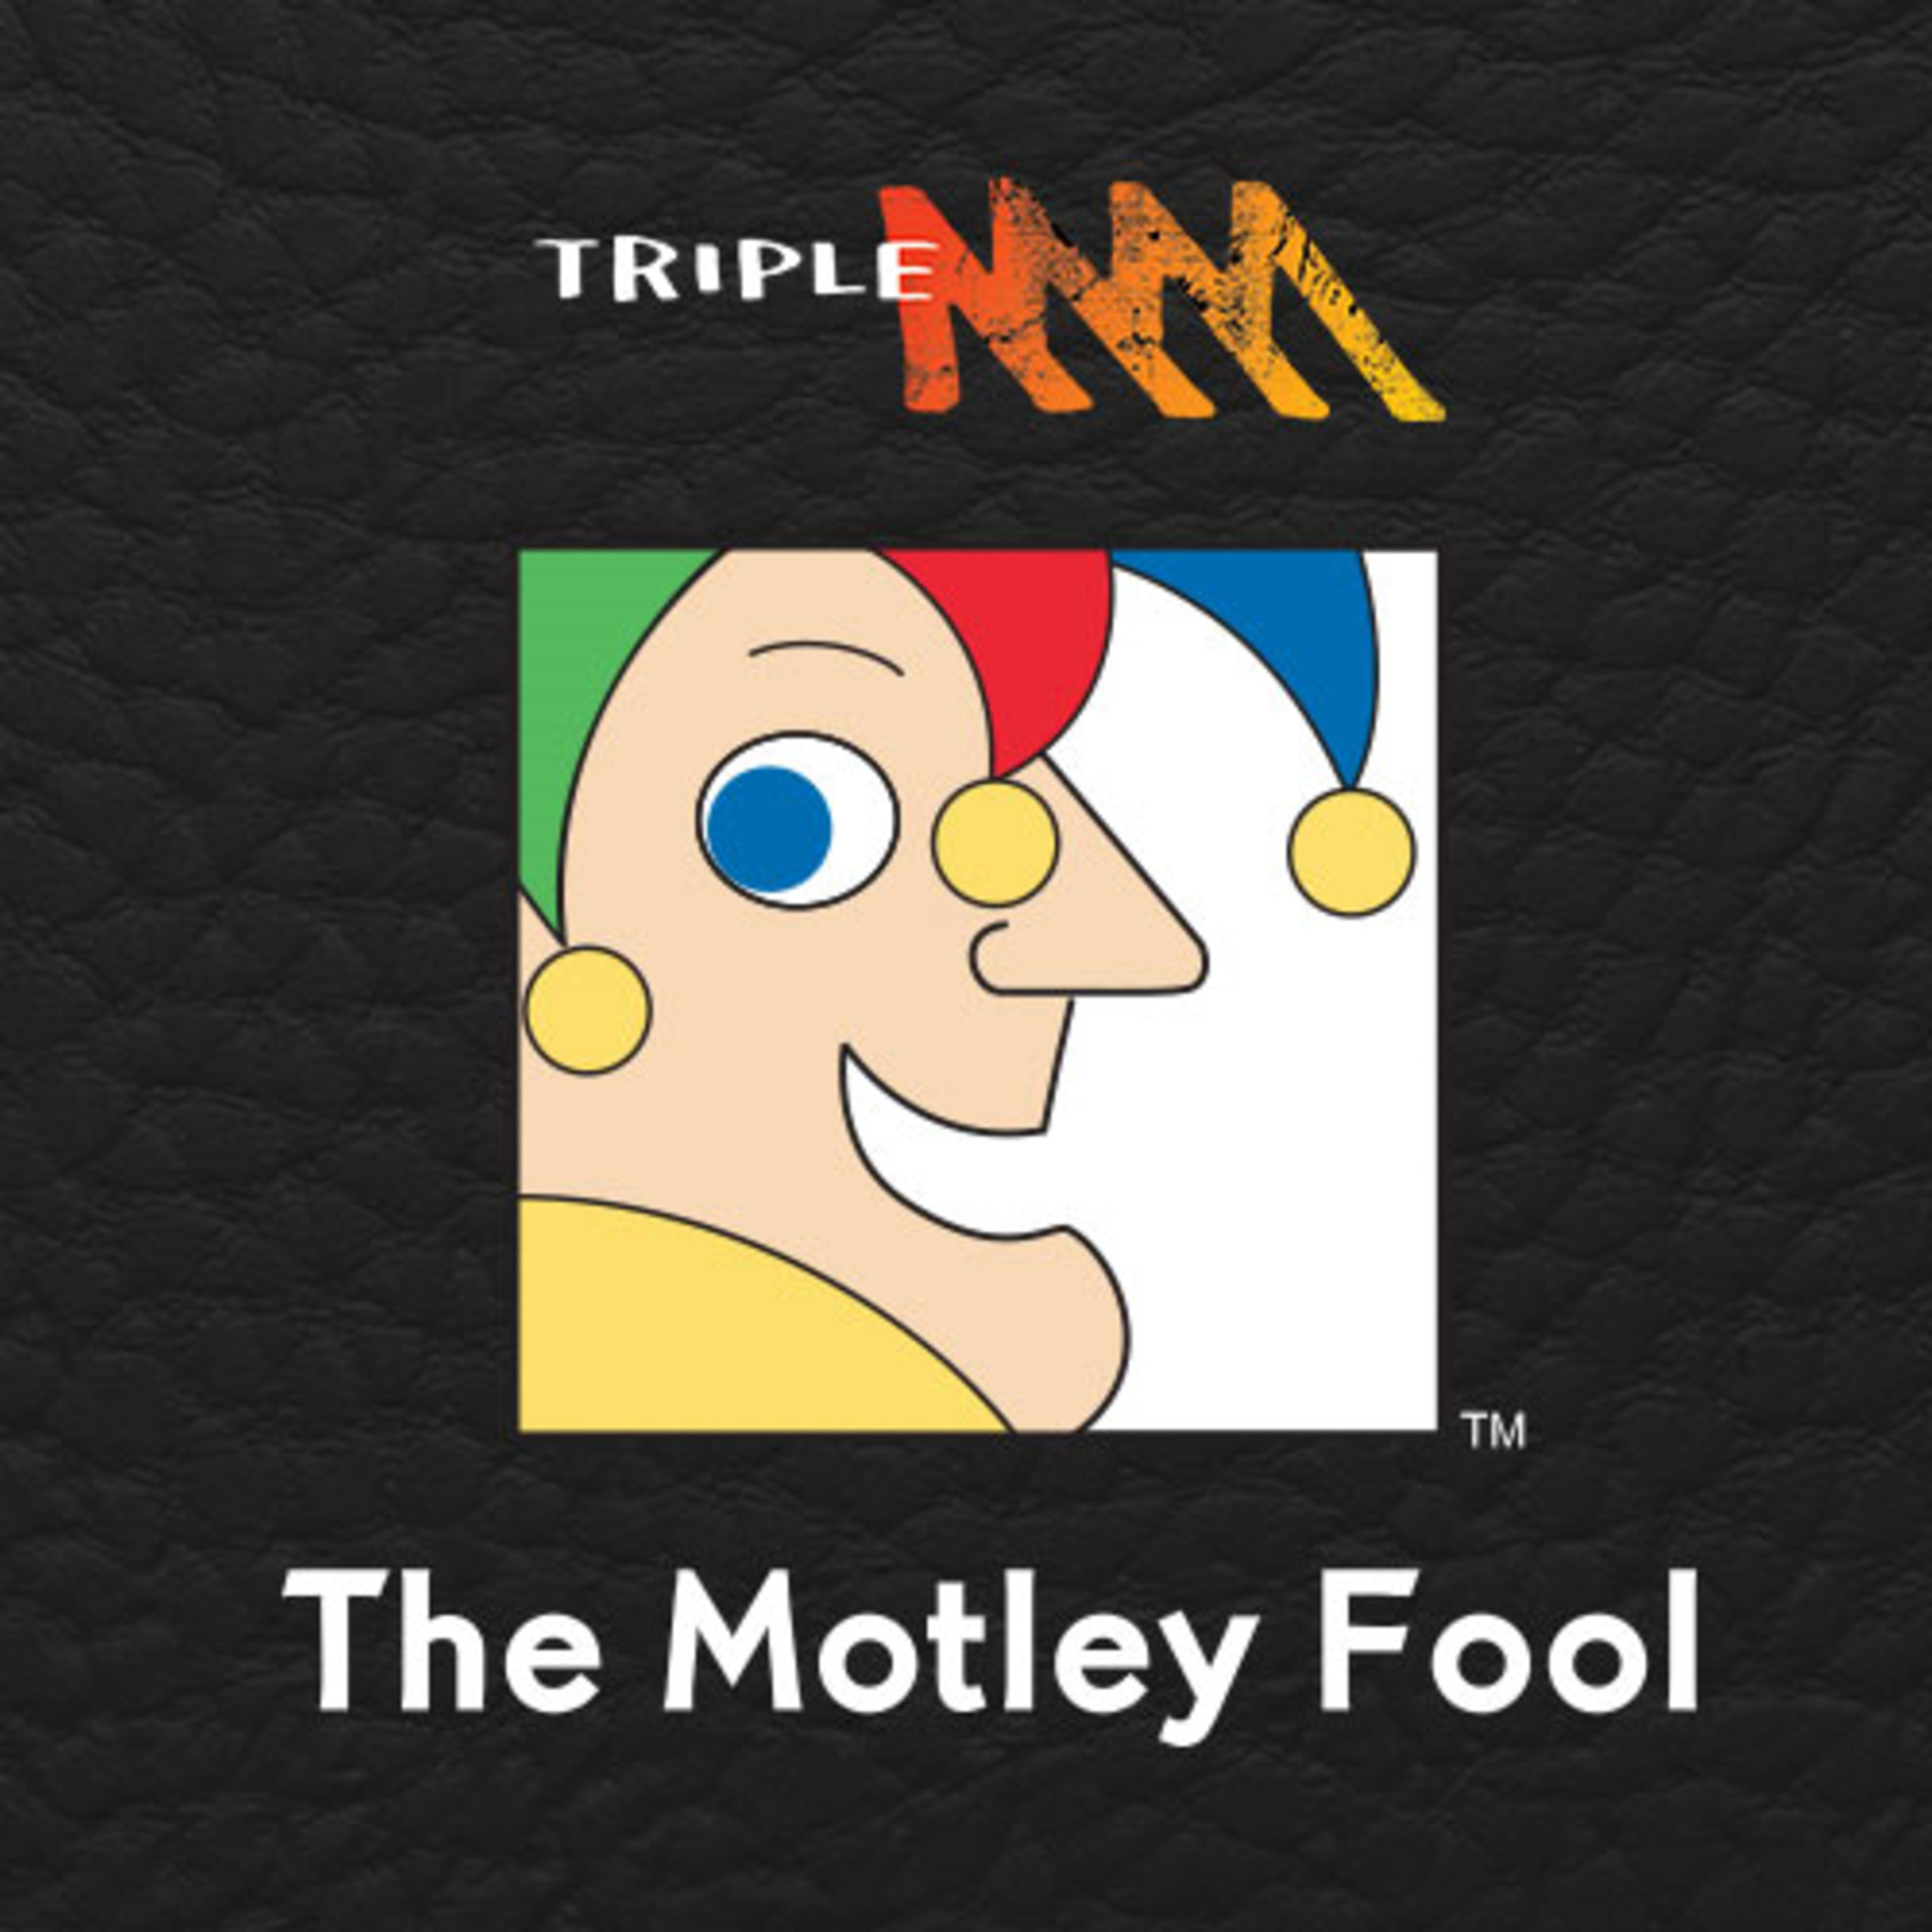 Trump adds tariffs to all Chinese Imports, Telstra vs the NBN, Apple and Alphabet's $100b problem - Episode 165 August 2 - Triple M's Motley Fool Money